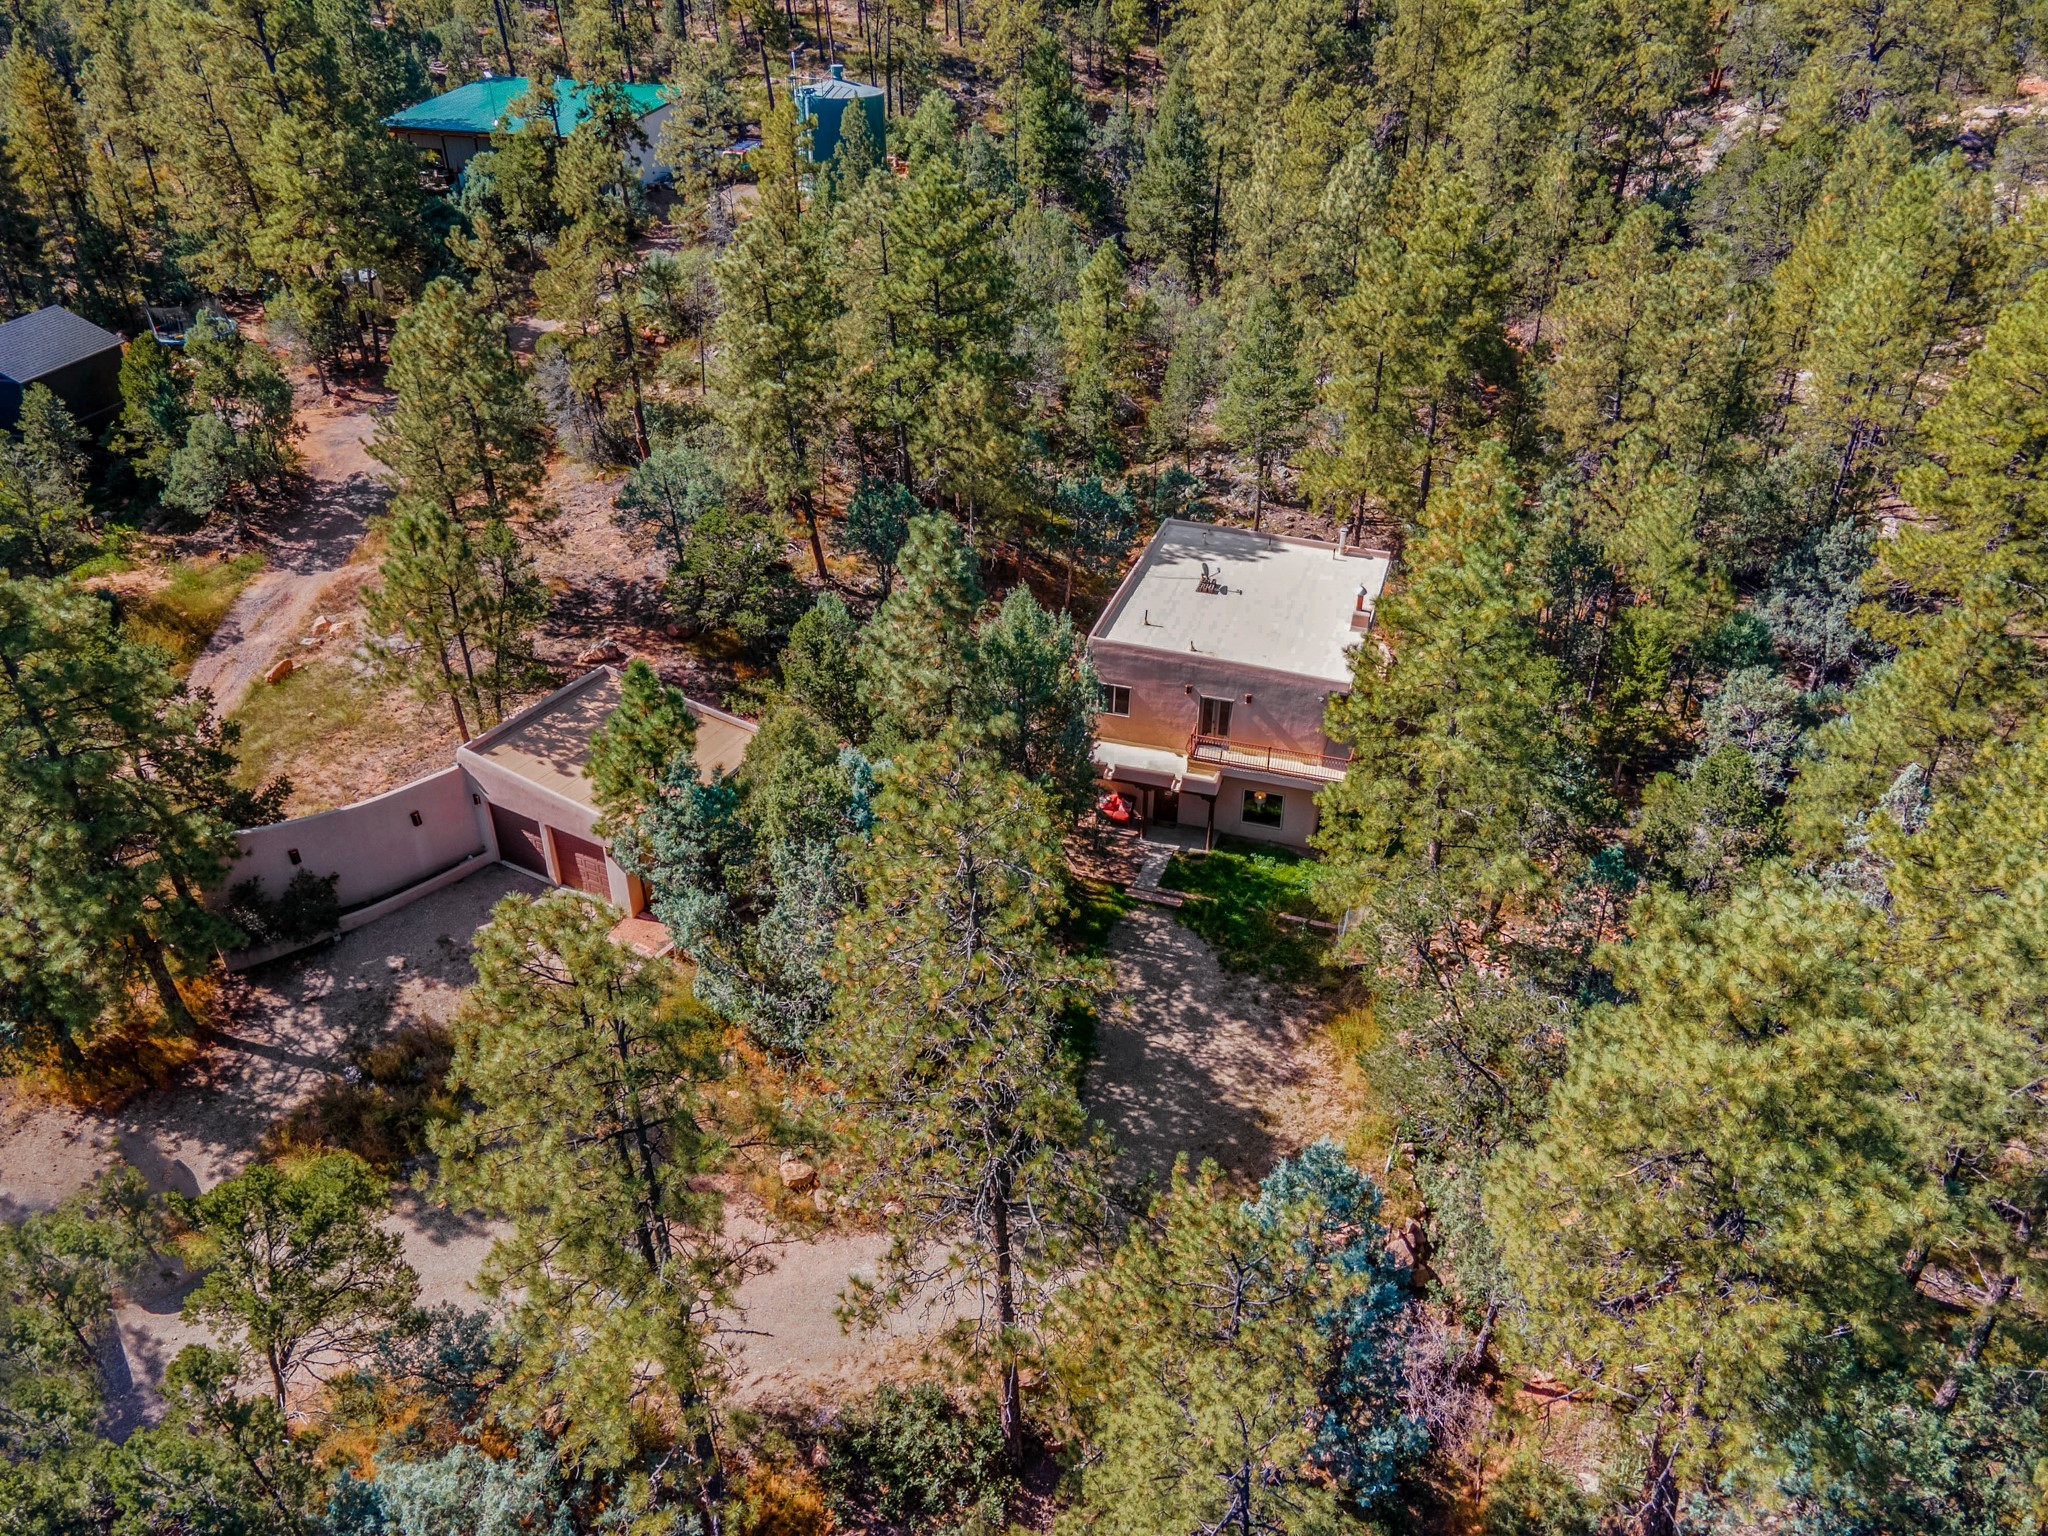 21 A Pine Haven, Glorieta, New Mexico 87535, 3 Bedrooms Bedrooms, ,3 BathroomsBathrooms,Residential,For Sale,21 A Pine Haven,202233115